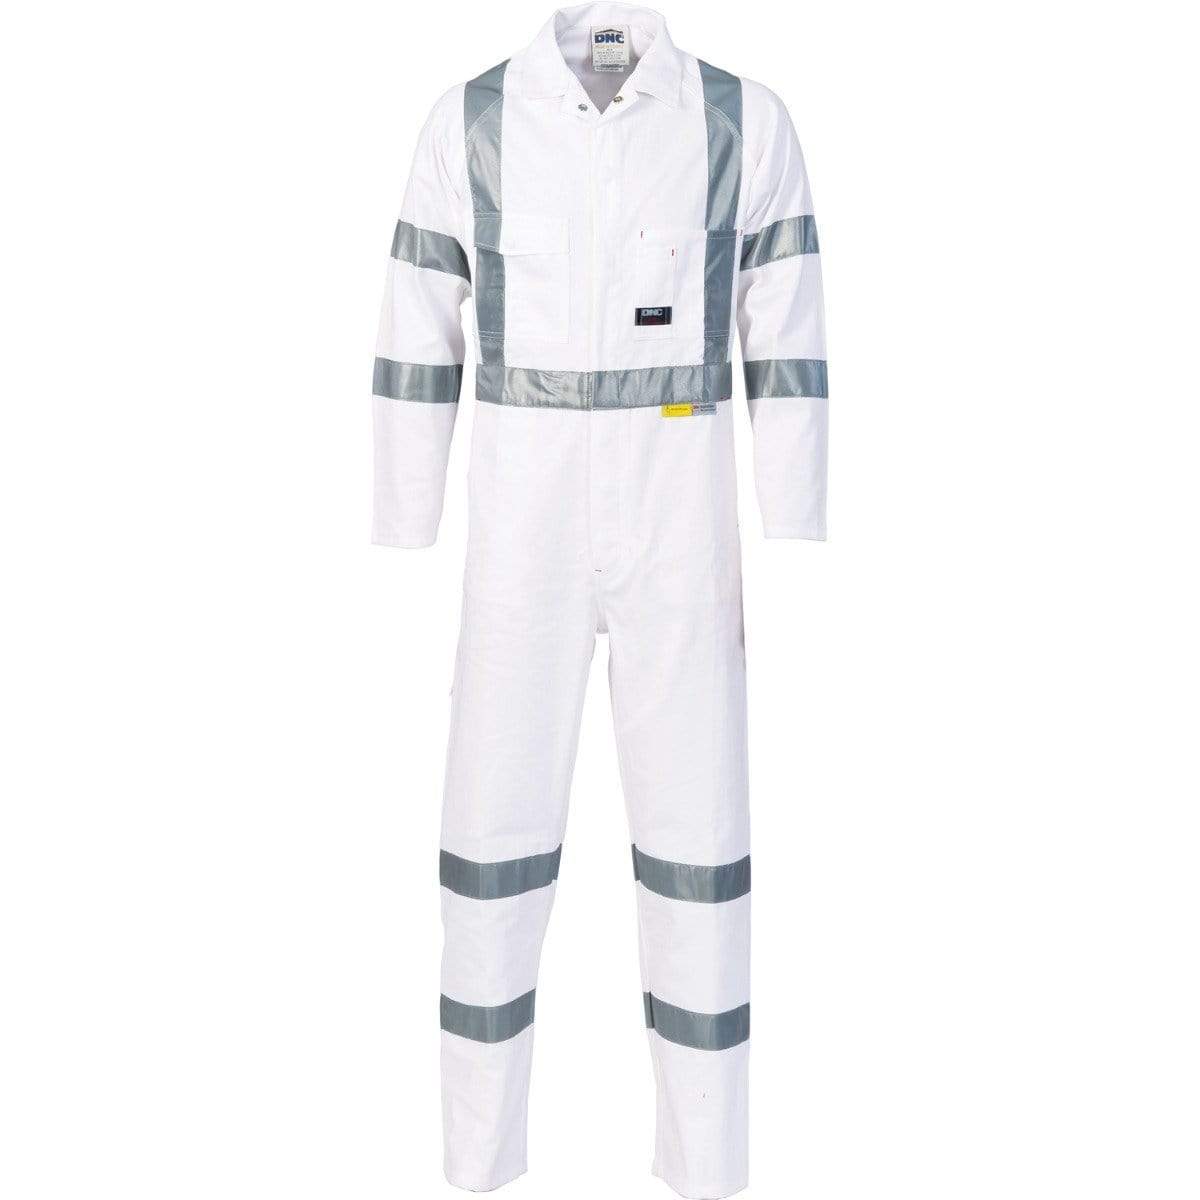 Dnc Workwear Rta Night Worker Coverall With 3m 8910 R/tape - 3856 Work Wear DNC Workwear White 77R 